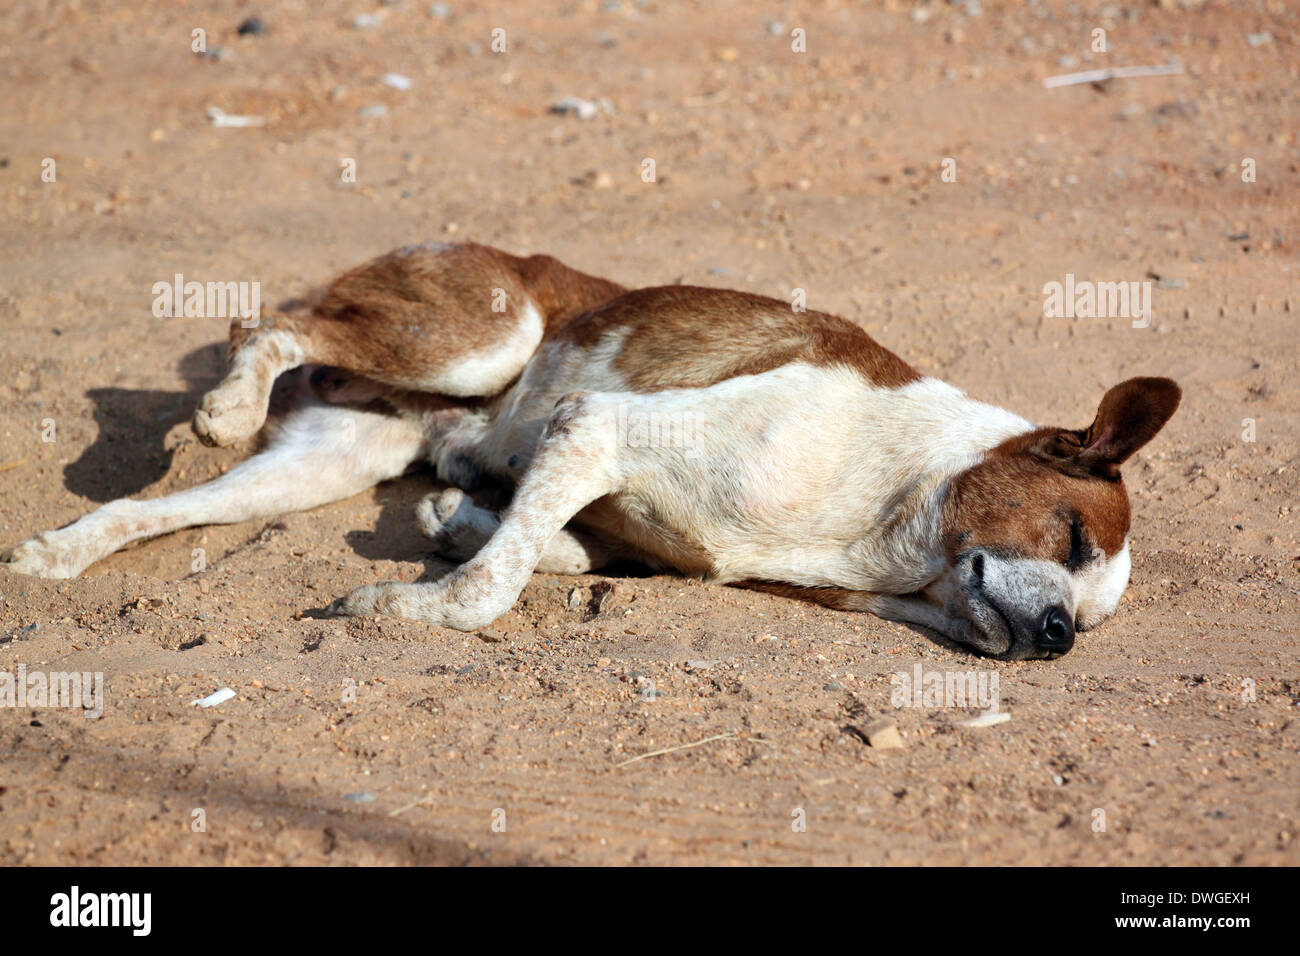 Sleeping Dog on the ground in rural. Stock Photo